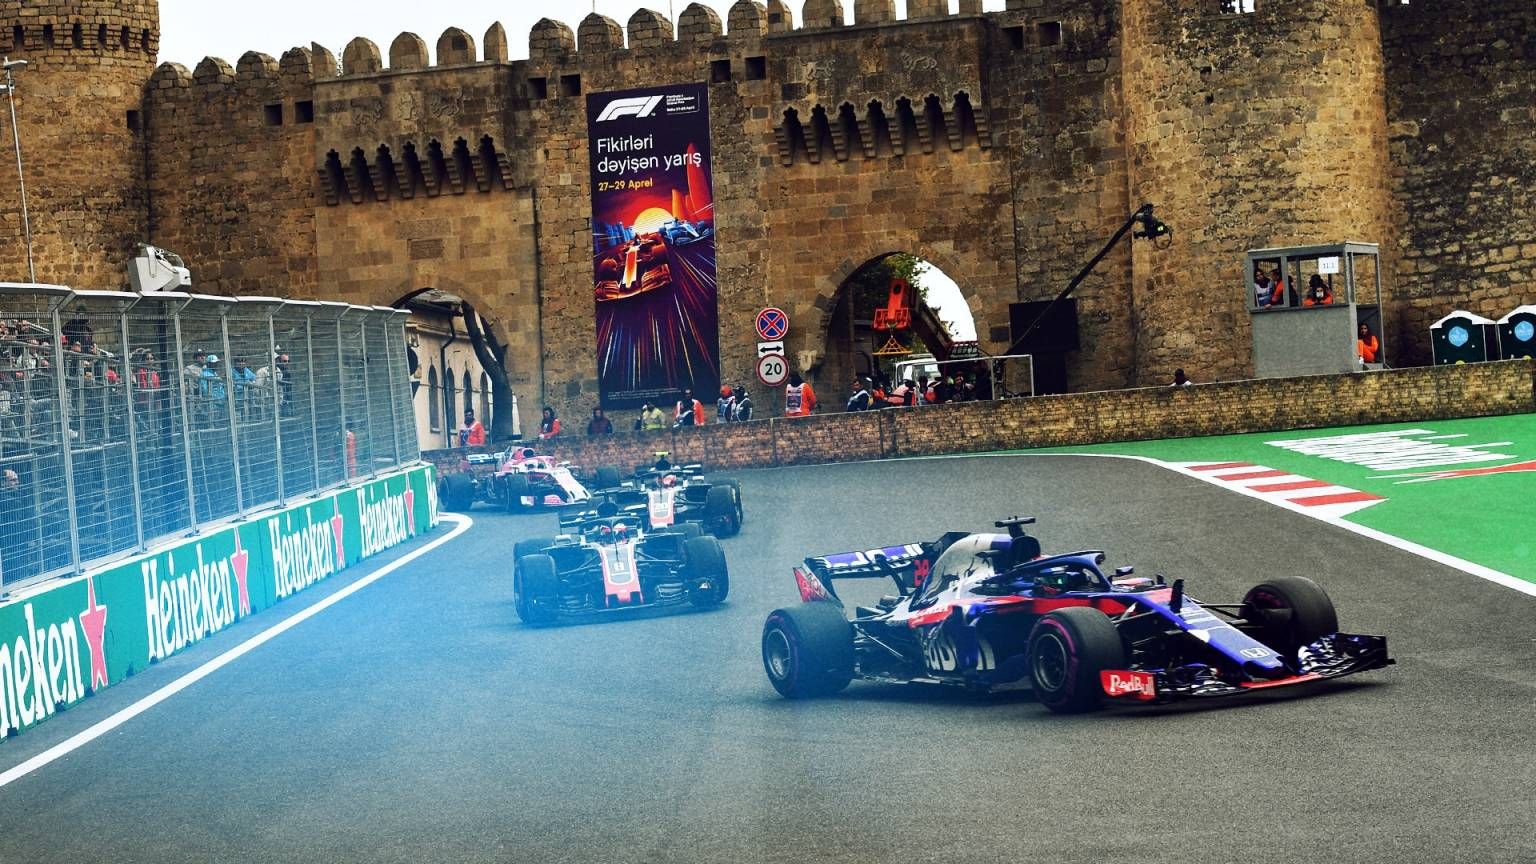 Netflix to film series about F1 race in Baku  